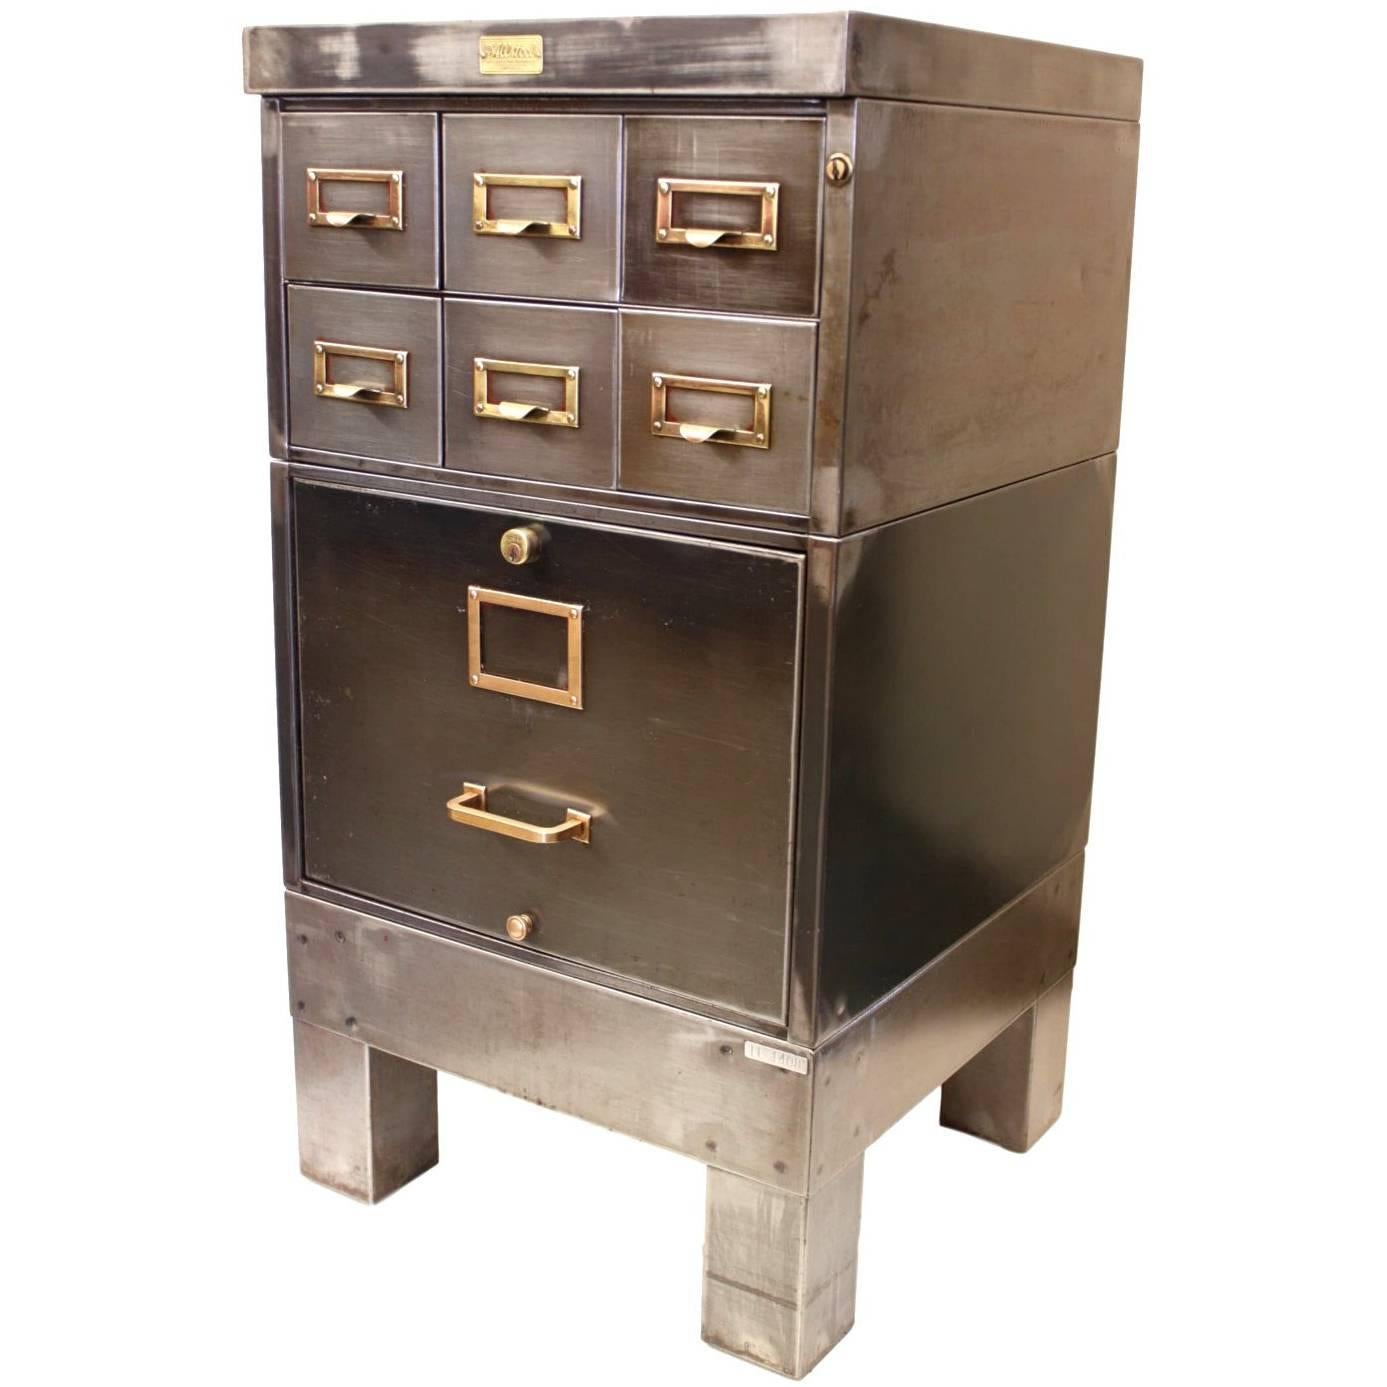 Vintage 1940s Industrial Raw Steel File Cabinet Card Catalog End Table